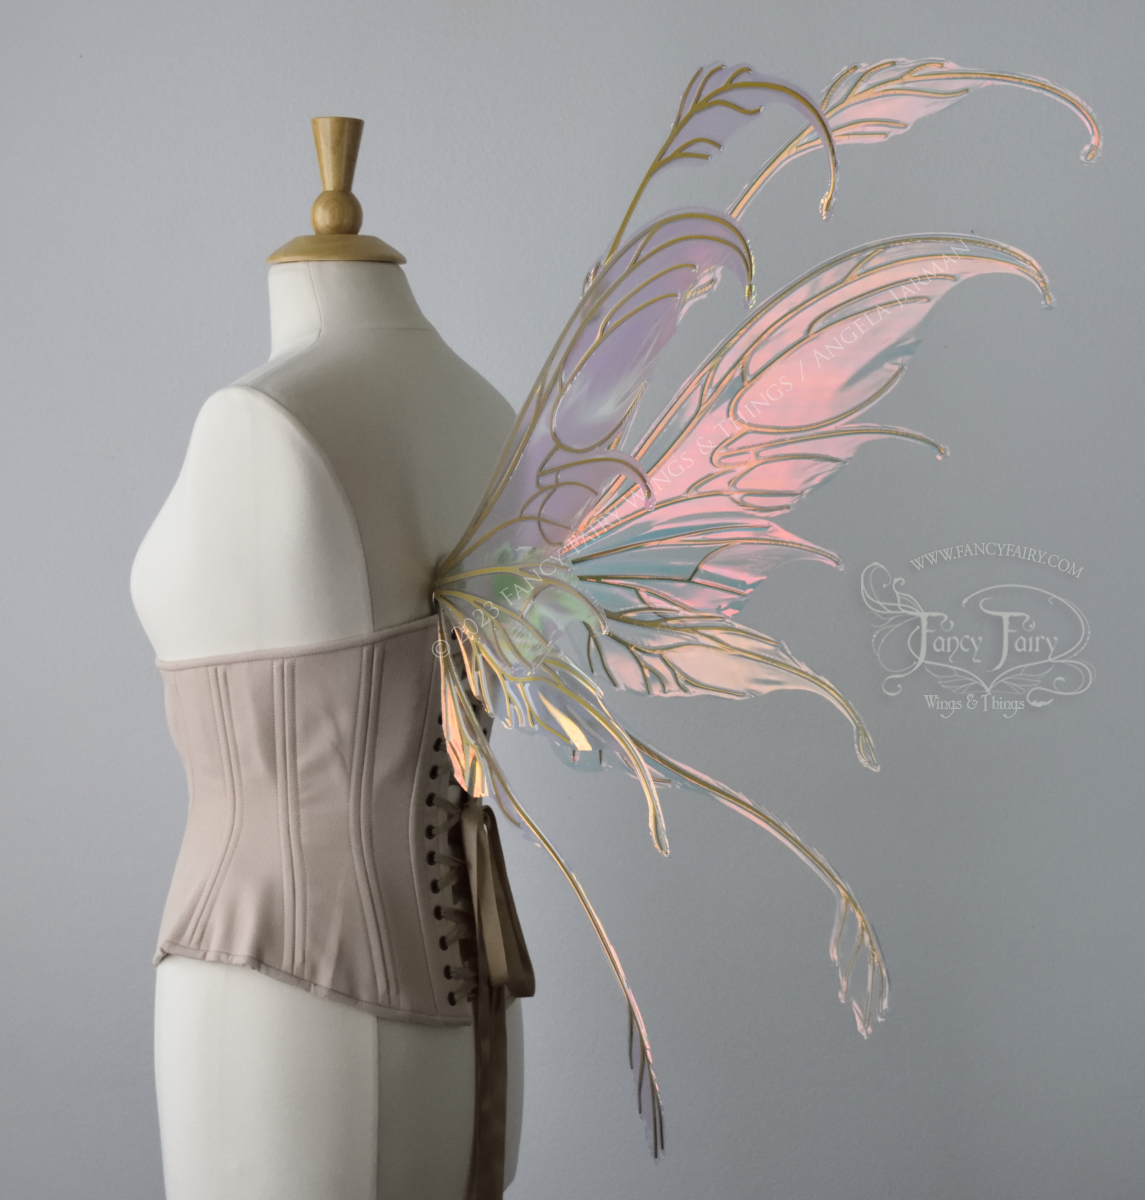 Back 3/4 view of an ivory dress form wearing an underbust corset & 'Fauna' pinkish iridescent fairy wings with gold veining